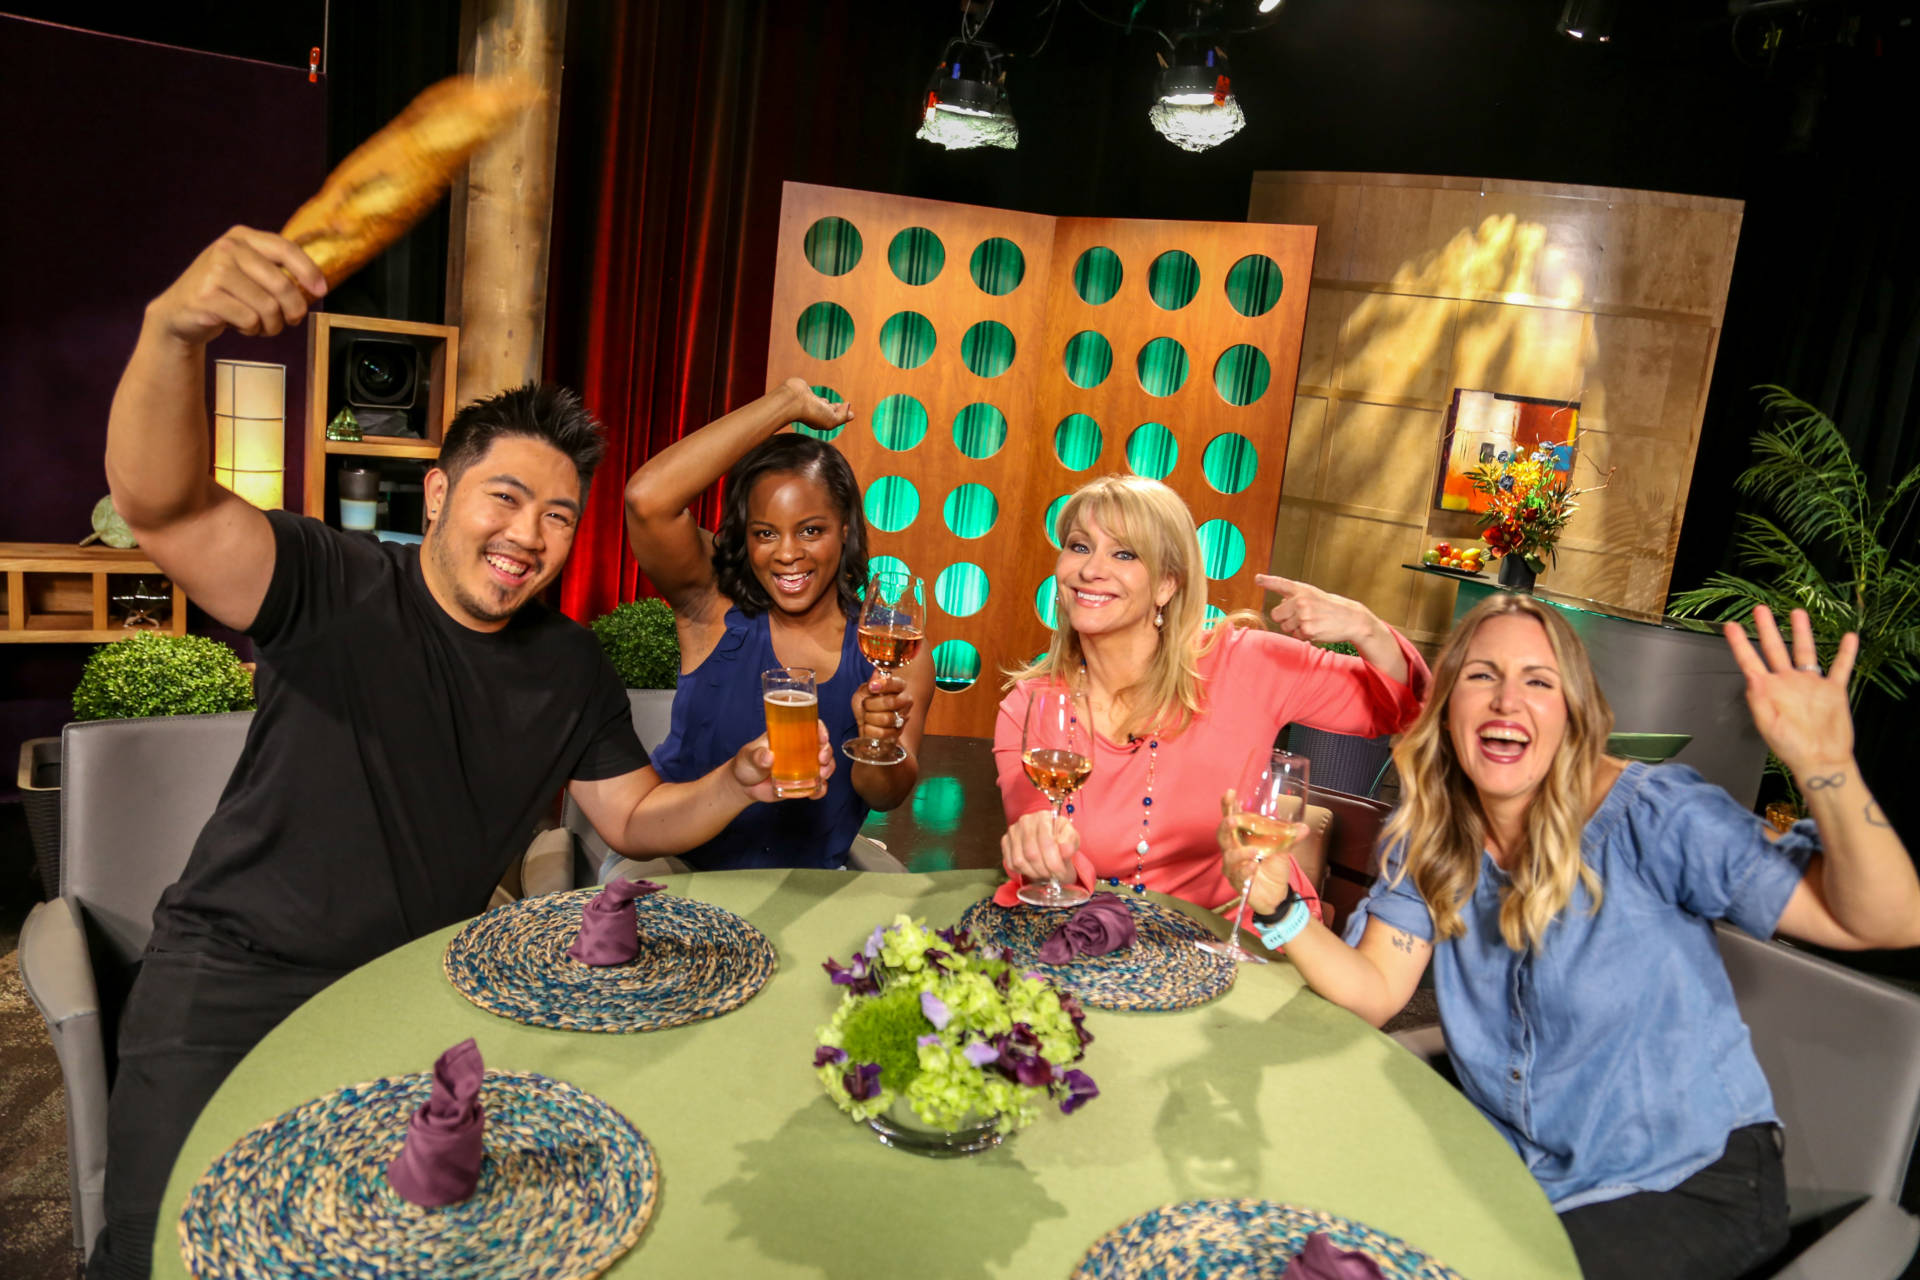 Host Leslie Sbrocco and guests on the set of season 13 episode 12.